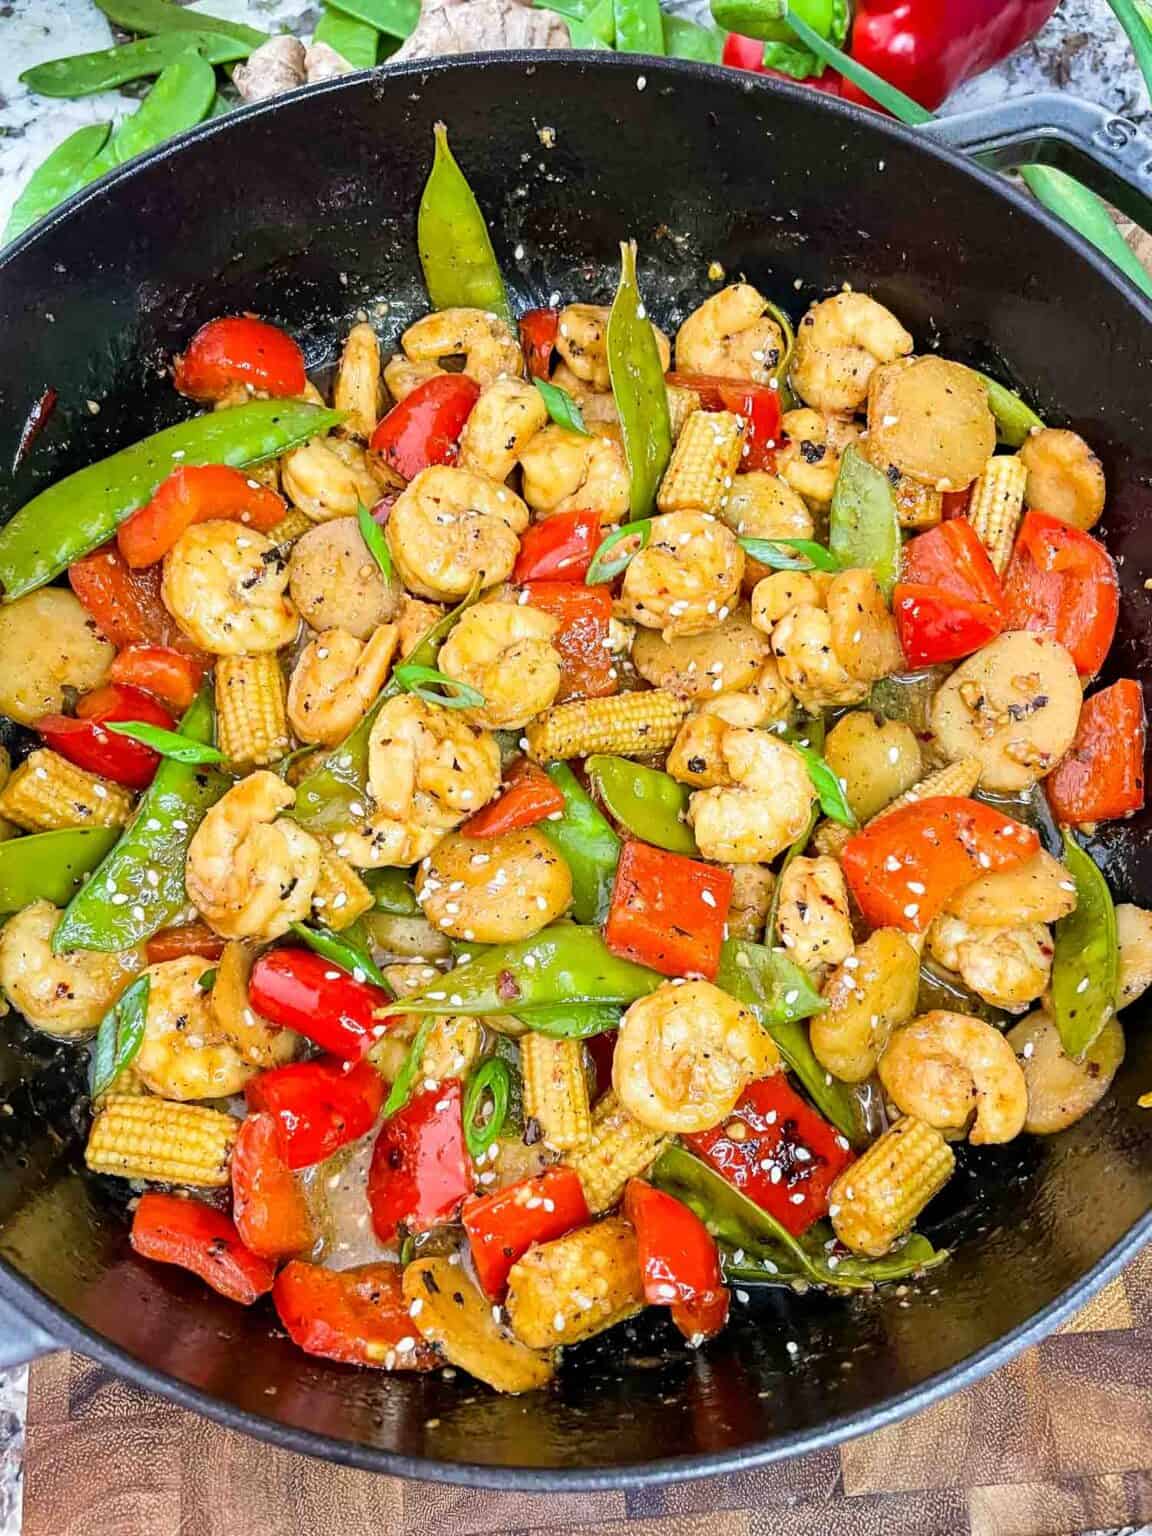 Sweet and Sour Shrimp Stir Fry in a large wok.
